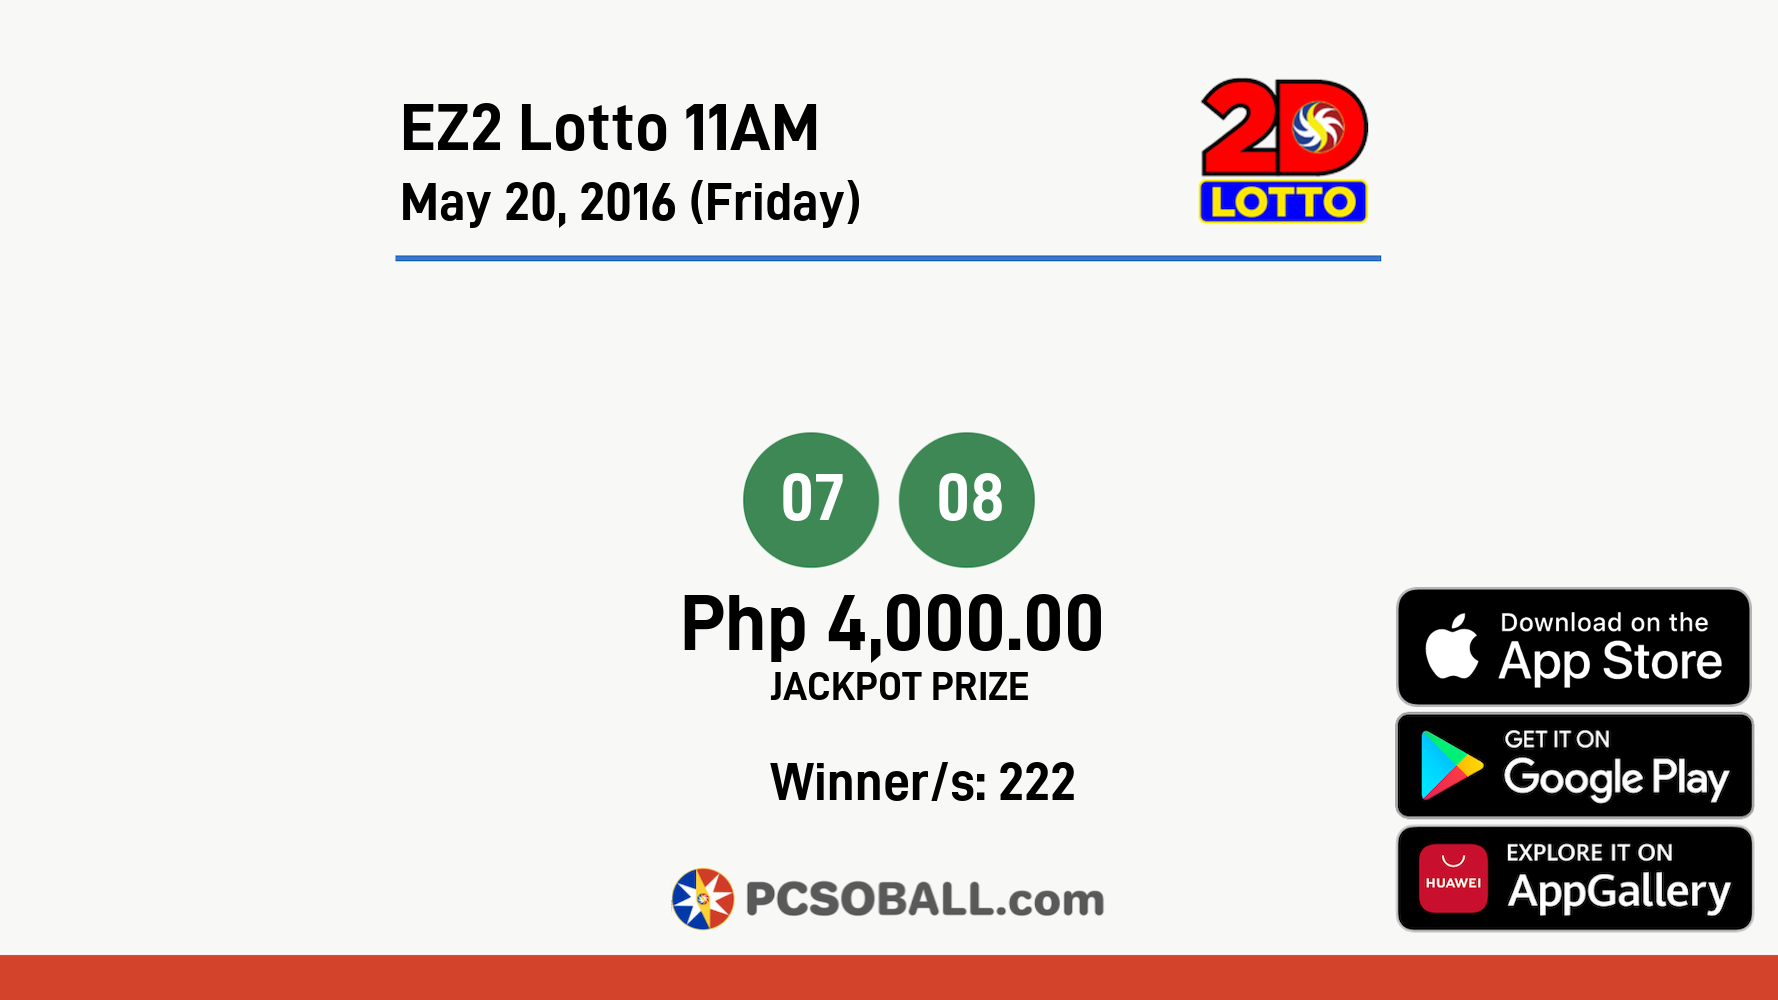 EZ2 Lotto 11AM May 20, 2016 (Friday) Result